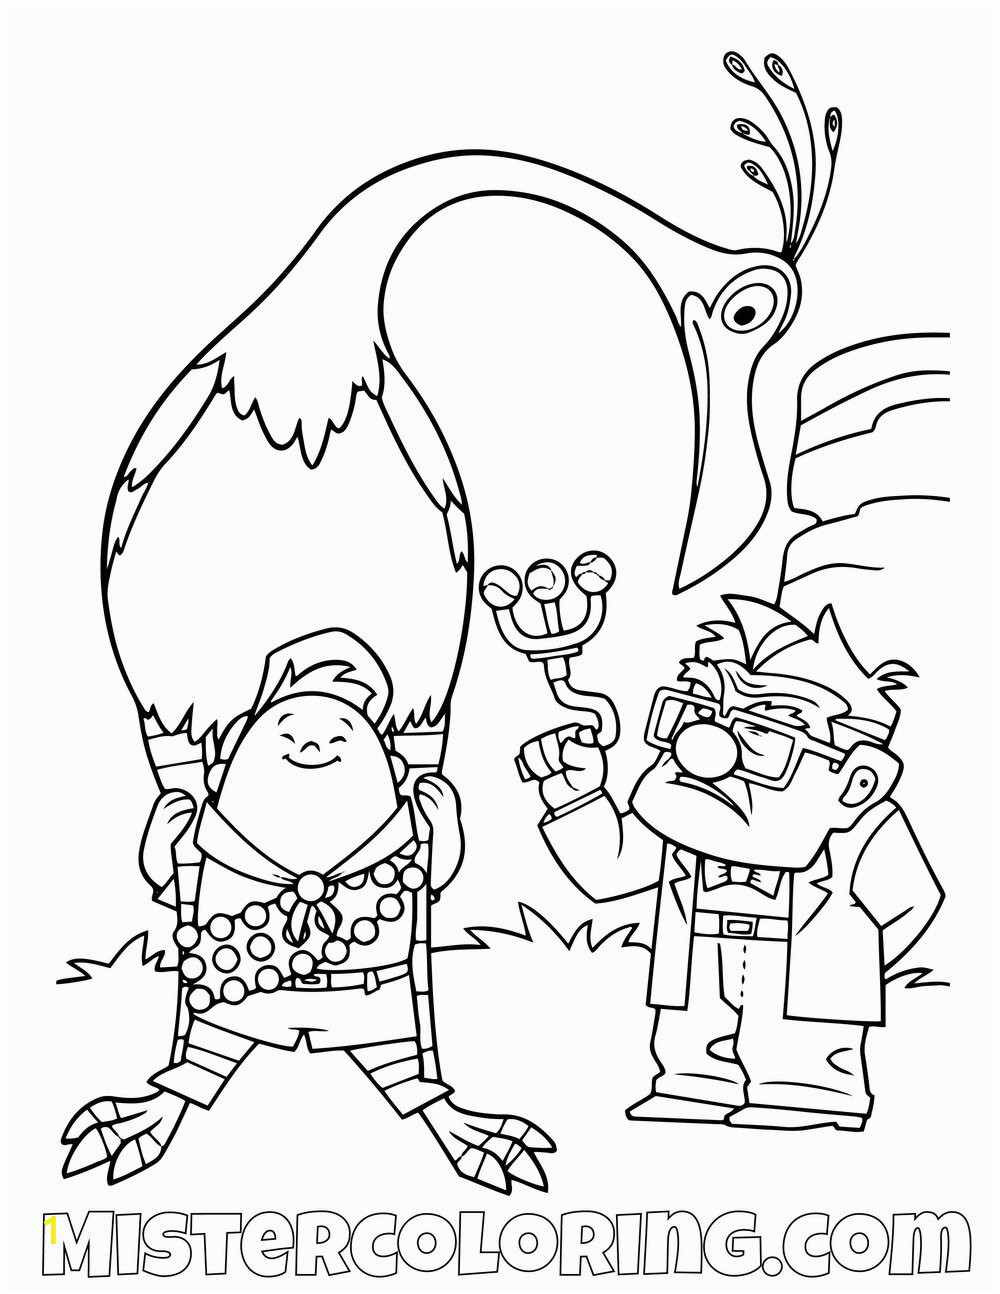 Russell Kevin And Carl Fredricksen Disney Pixar Up Movie Coloring Pages For Kids